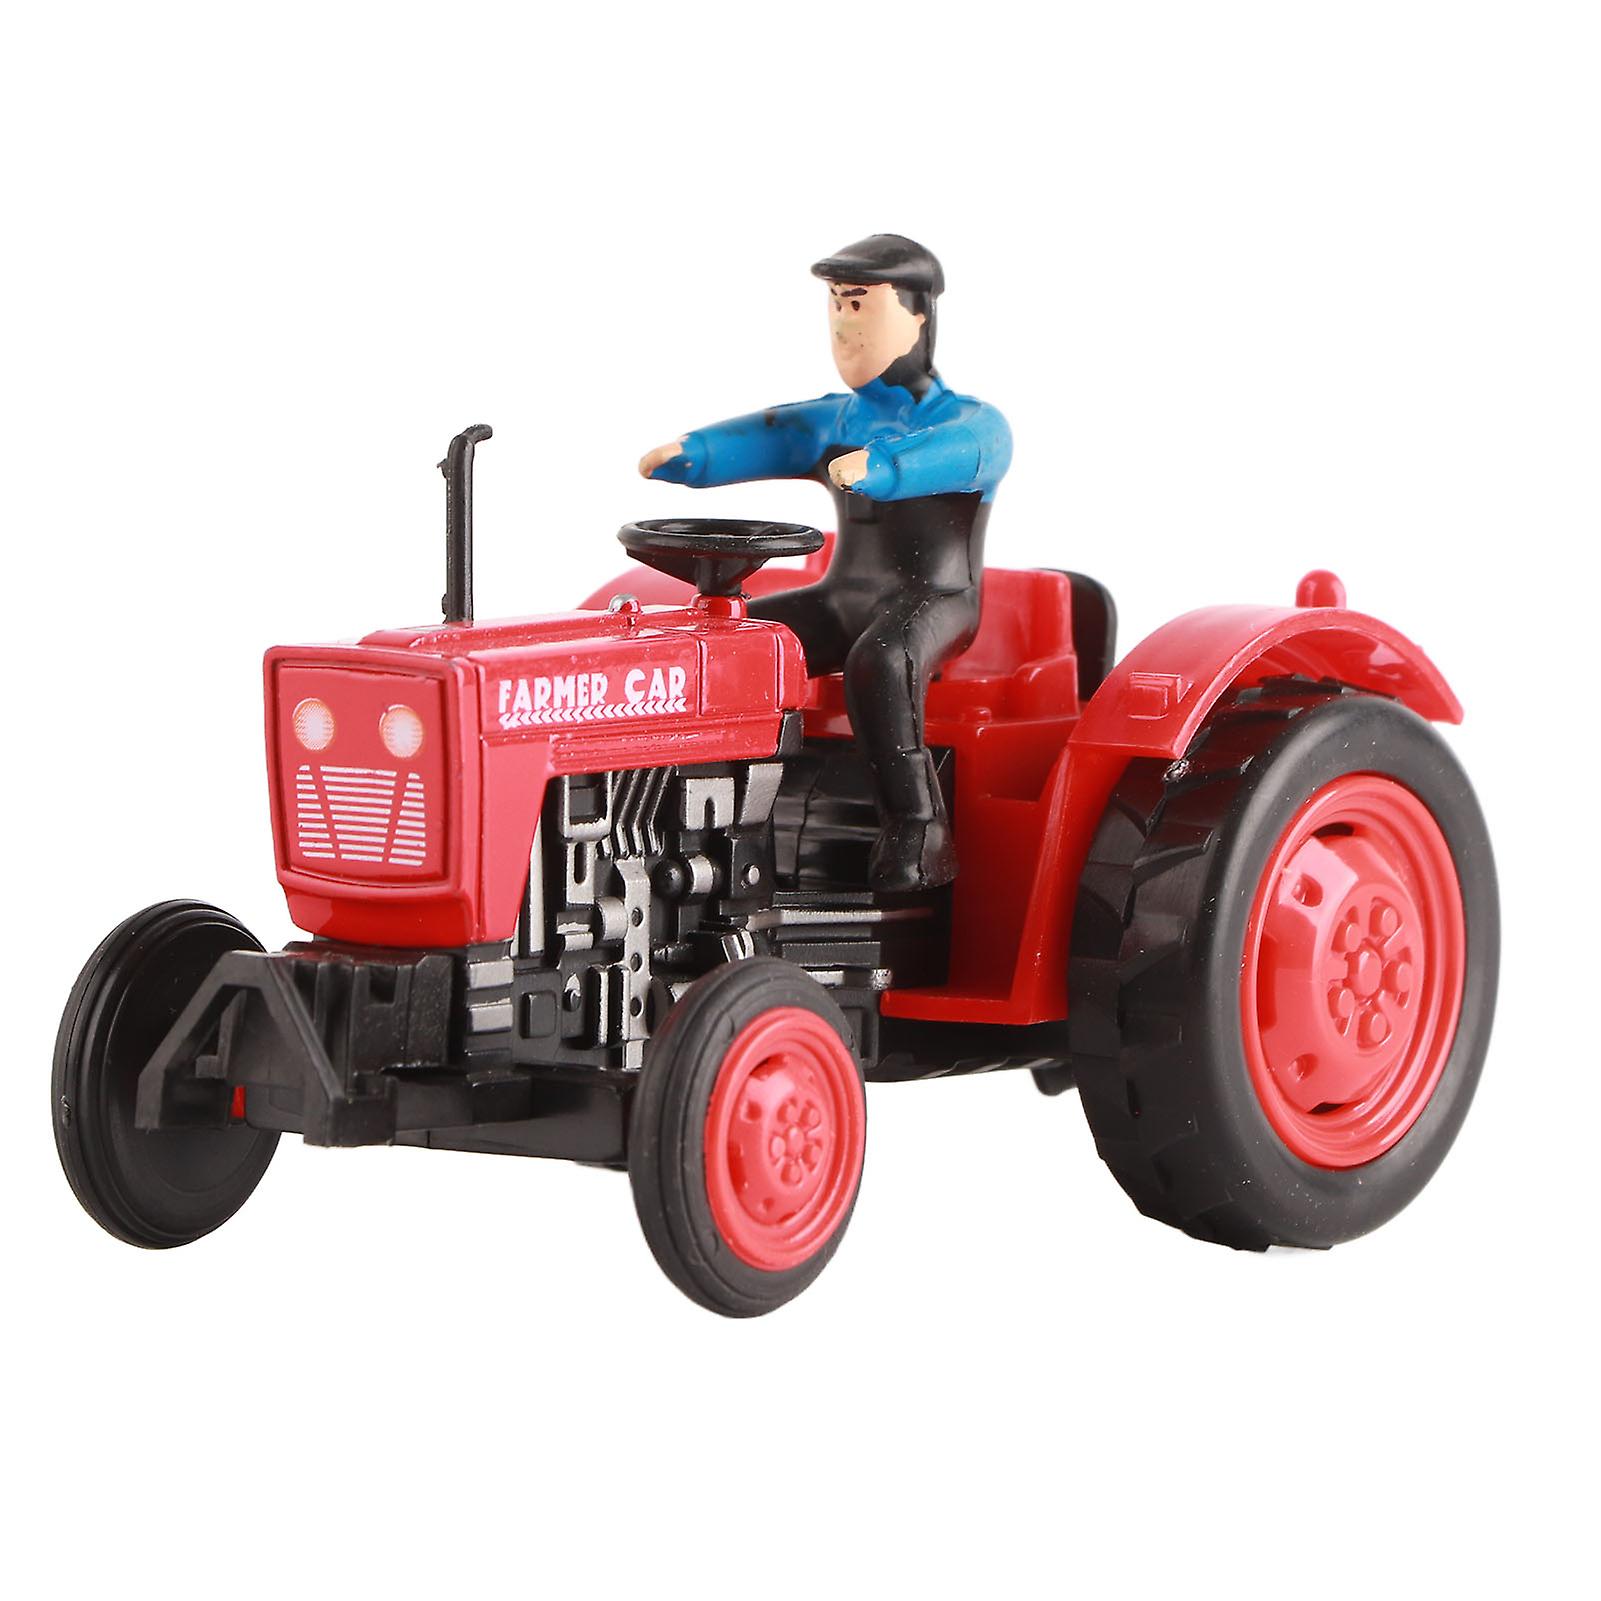 Simulation Tractor Vehicle Model Sturdy Alloy Engineering Farmer Car Toy For Children Kids Farm Vehicle Toysred